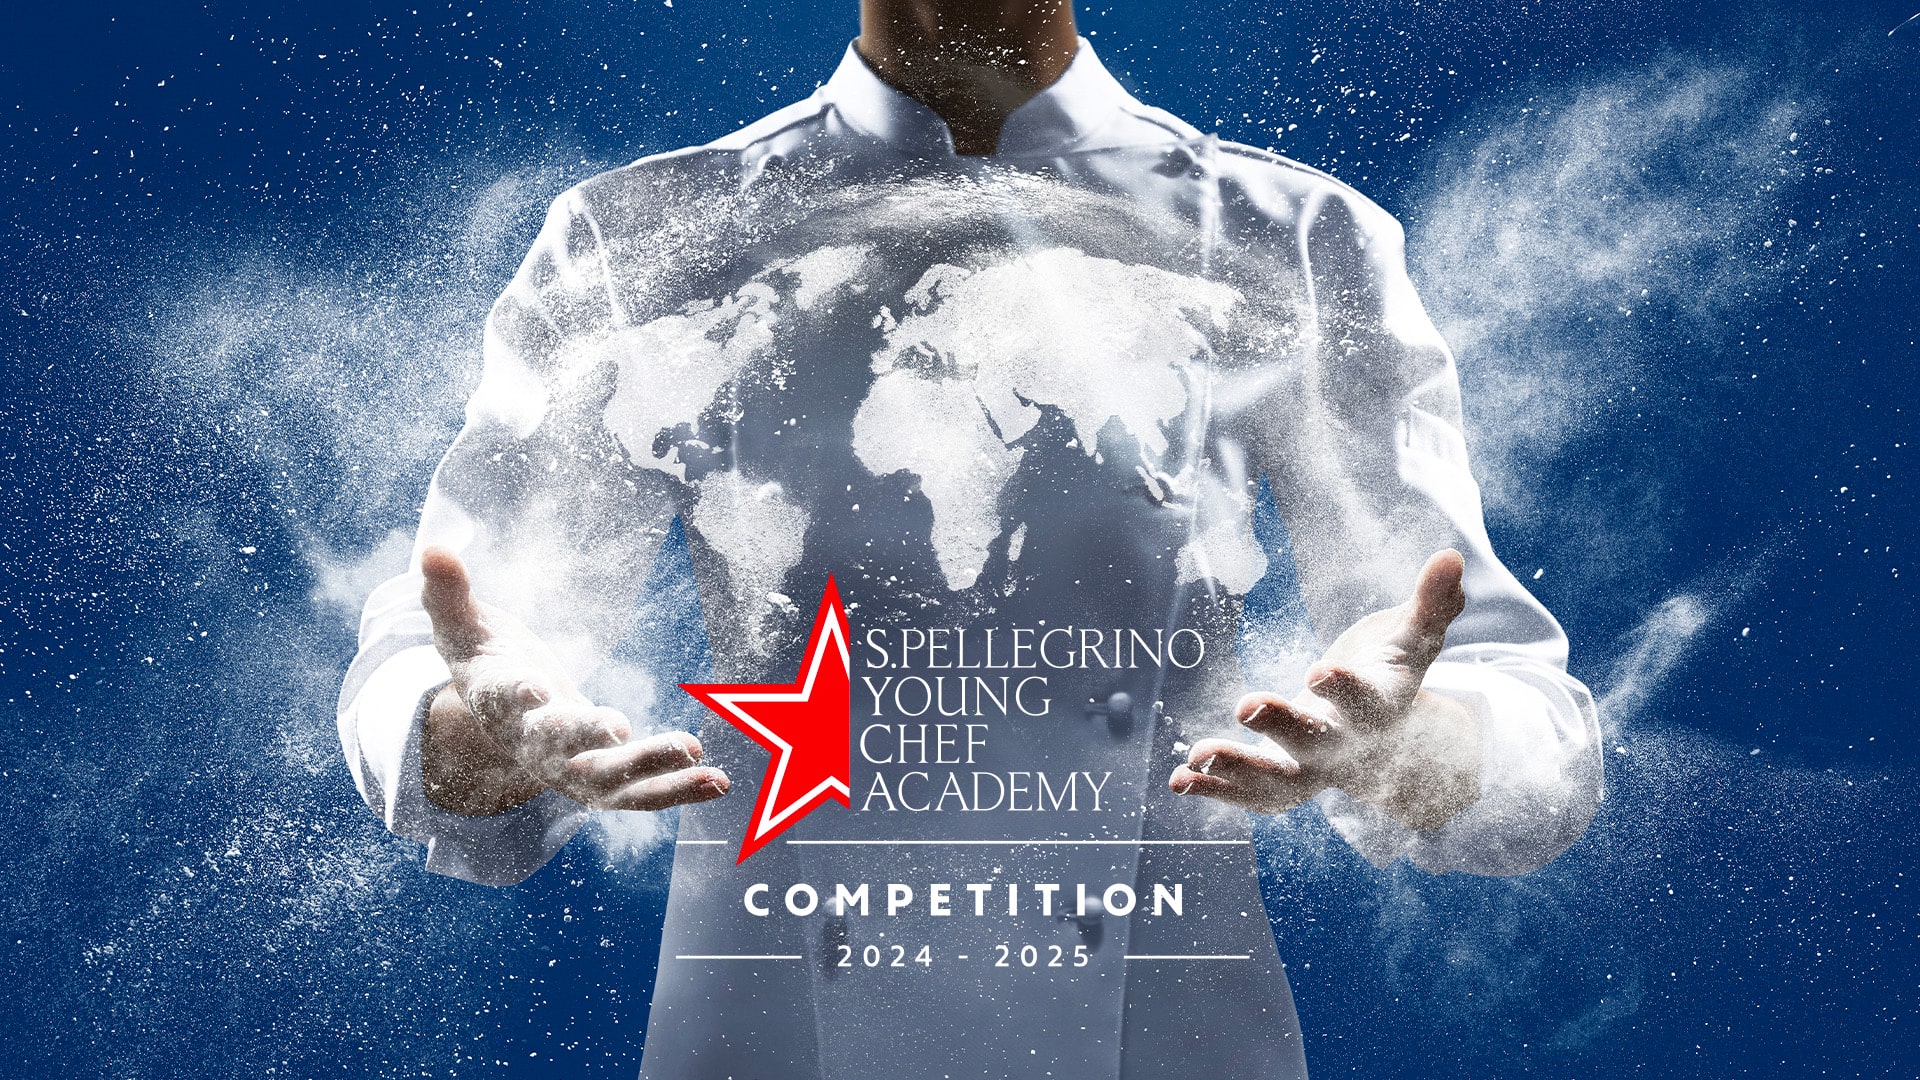 S. Pellegrino Young Chef Academy Competition 2024 Opens - Hotel and Catering Review